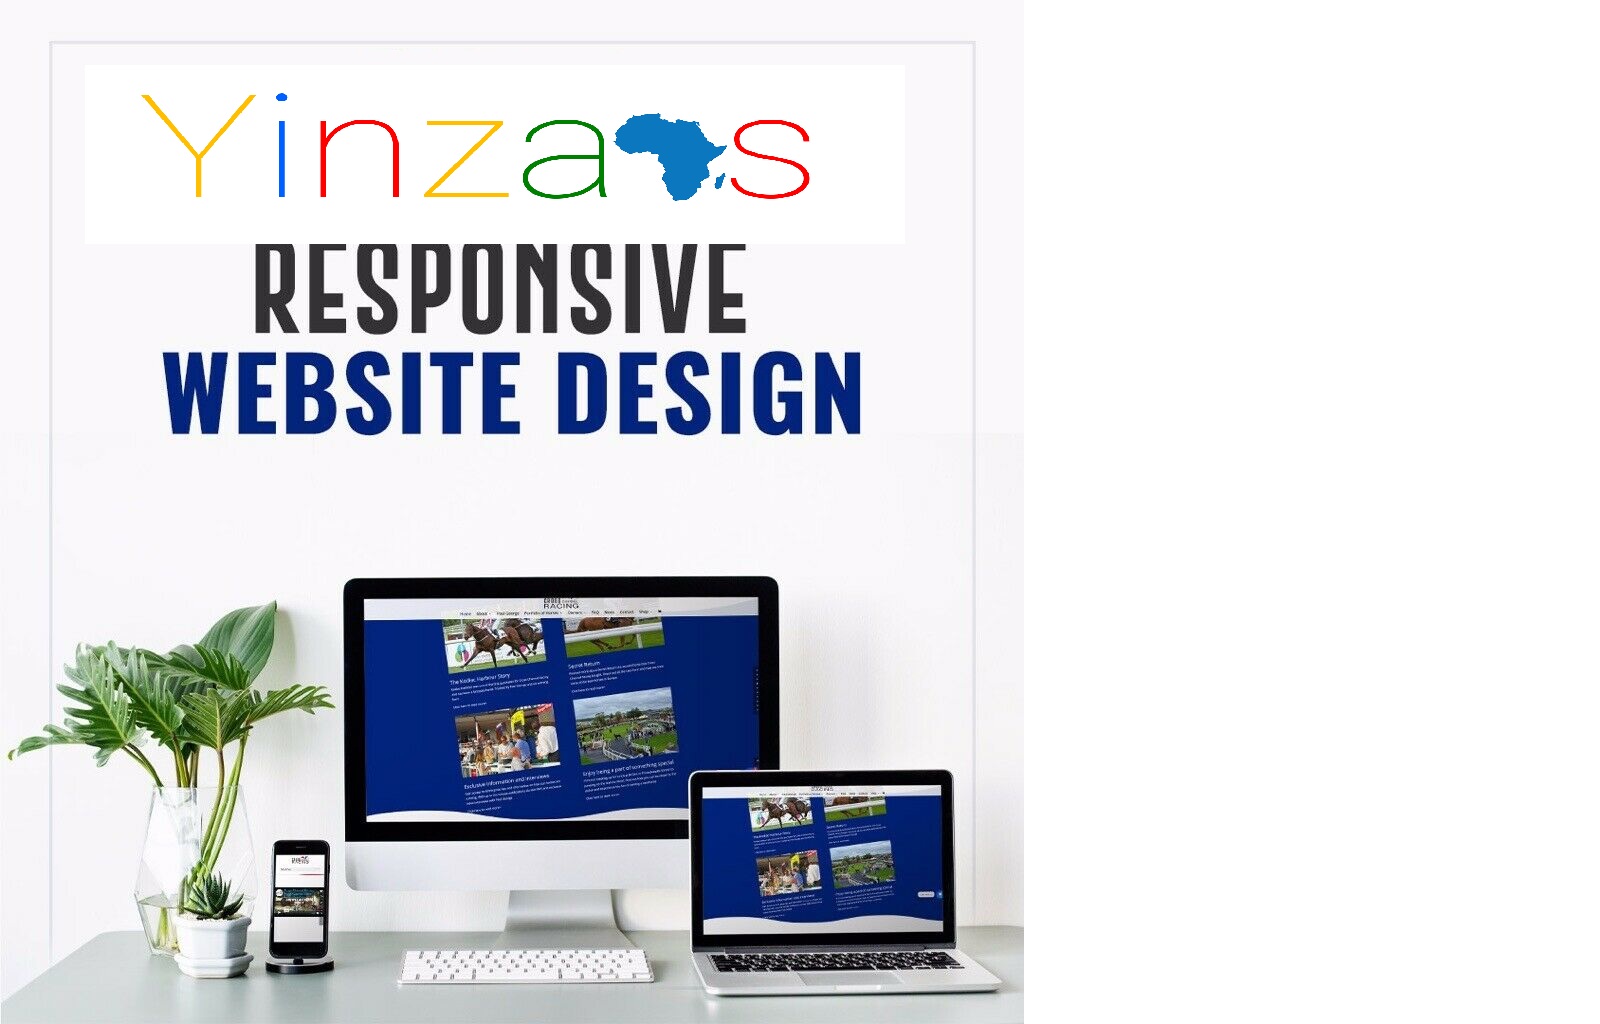 Randburg website design company -Yinzaas Digital Marketing, with hosting included and support for a year.Web design should be three things: human-centered, compelling and future-proof.  At  yinzaas, we don't believe in being just another web design company. We  believe your website is the natural extension of your brand’s story that  sets the tone for your online presence.     Your  website isn’t just a URL. It’s an essential component of your marketing  and business strategy. It’s an extension 